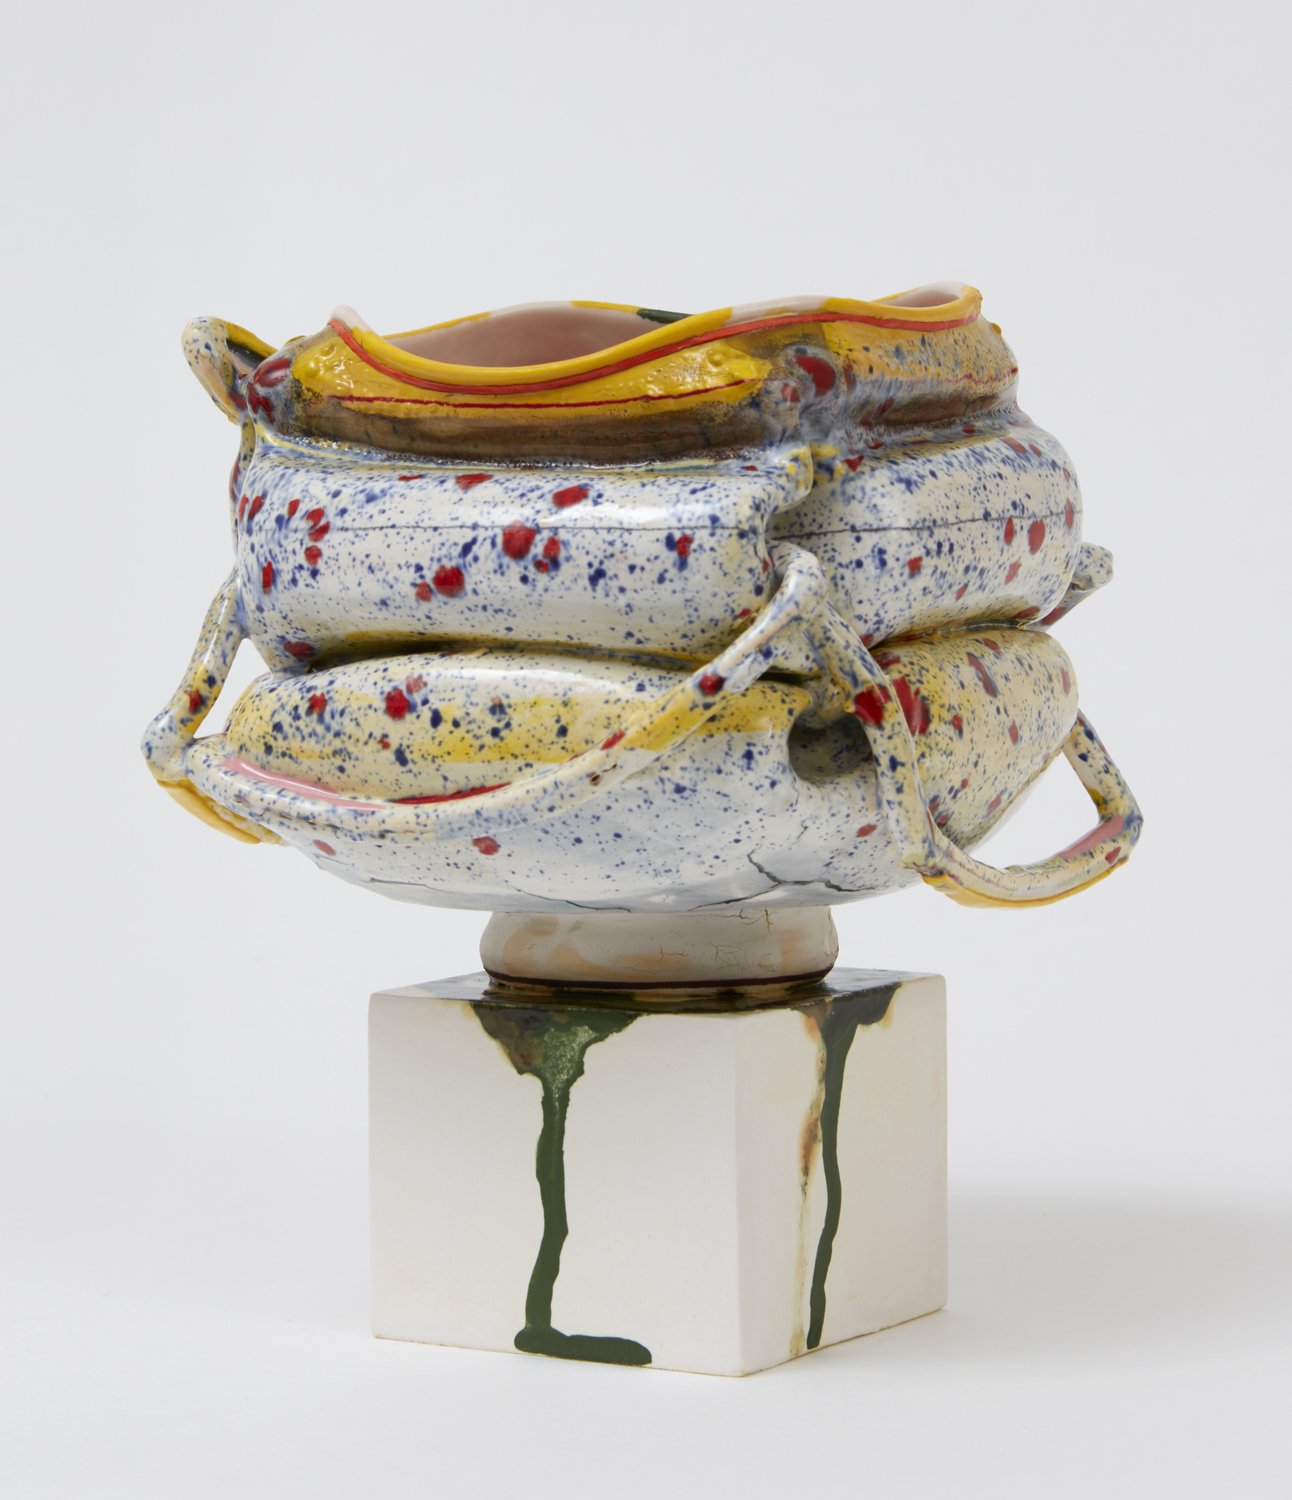  Kathy Butterly (United States, born 1963),  Crossed Arms , 2019, clay, glaze, 6 1/4 x 6 1/4 x 6 1/4 inches. Collection of Maxine and Stuart Frankel Foundation for Art, Bloomfield Hills, MI. © Kathy Butterly. Image courtesy the artist and James Cohan